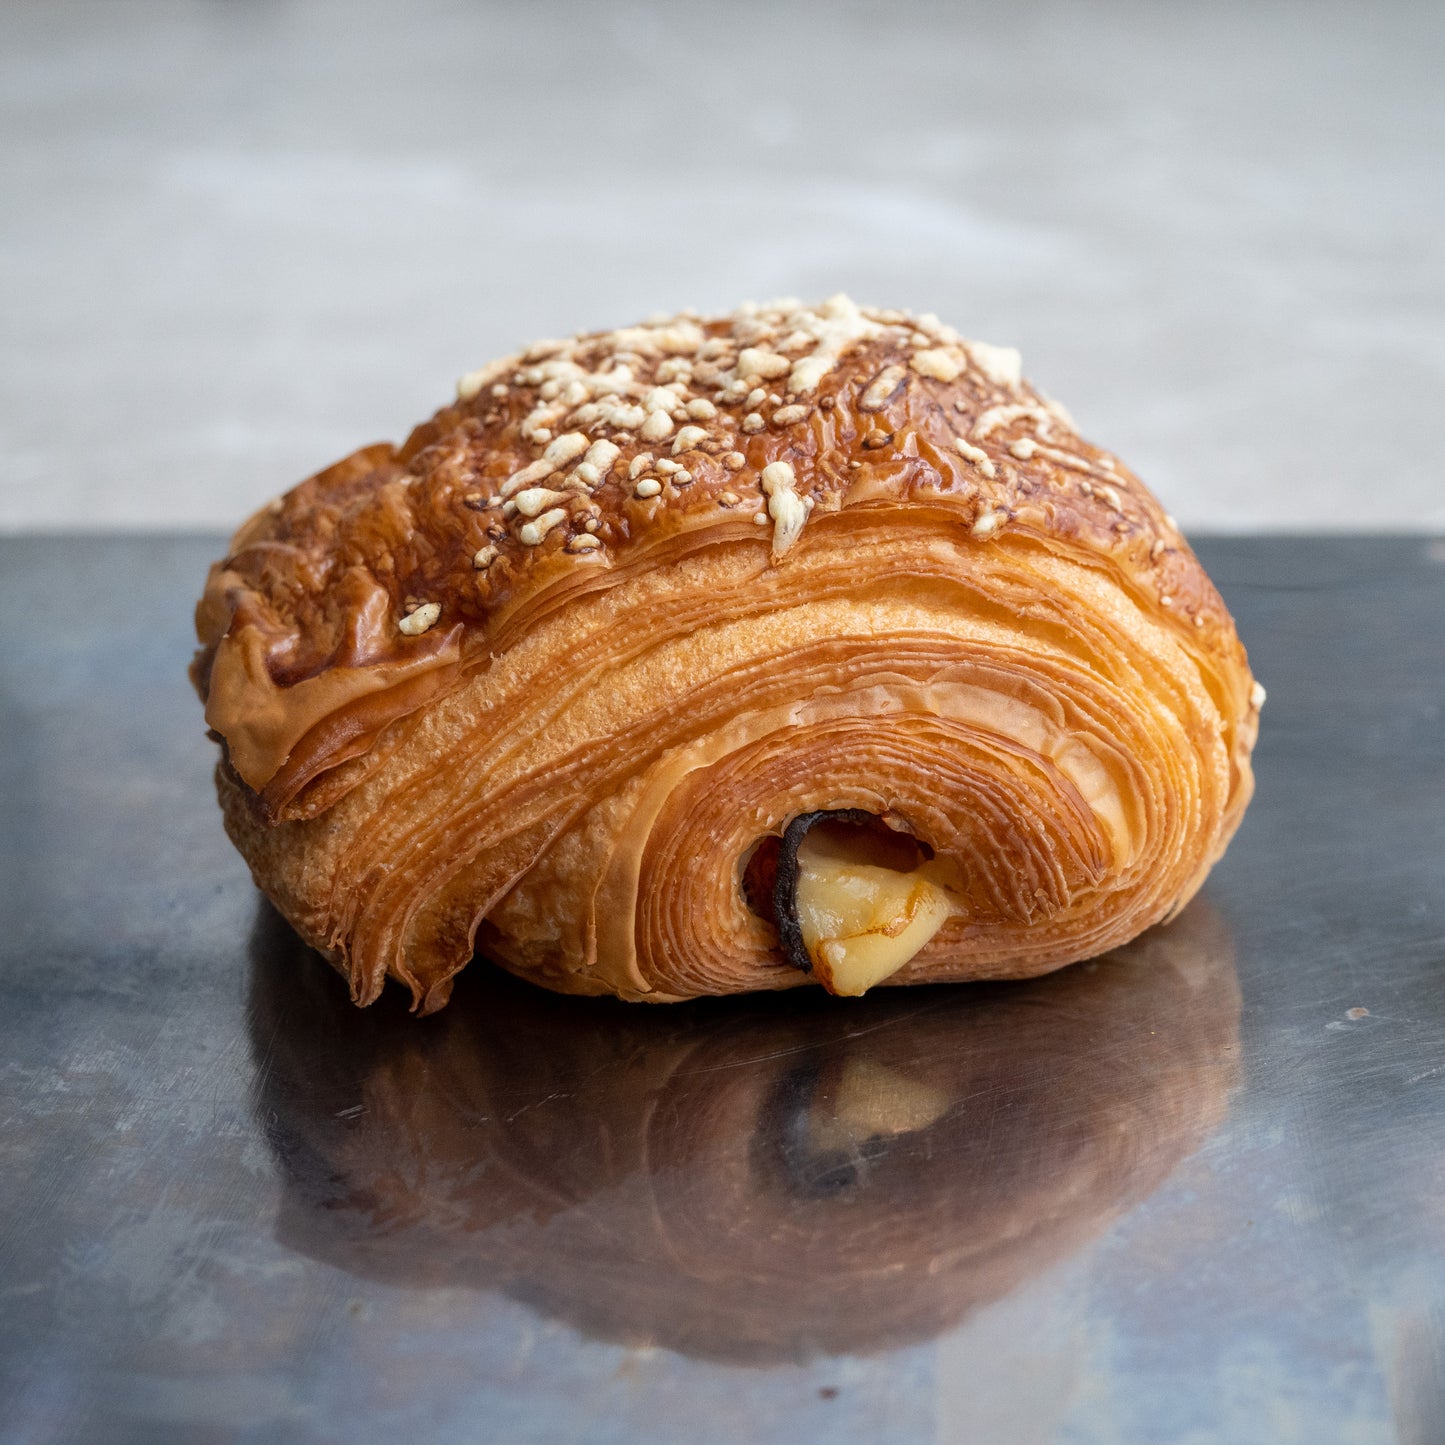 Ham and cheese croissant, made with flaky croissant dough, filled with savory ham and emmental cheese.